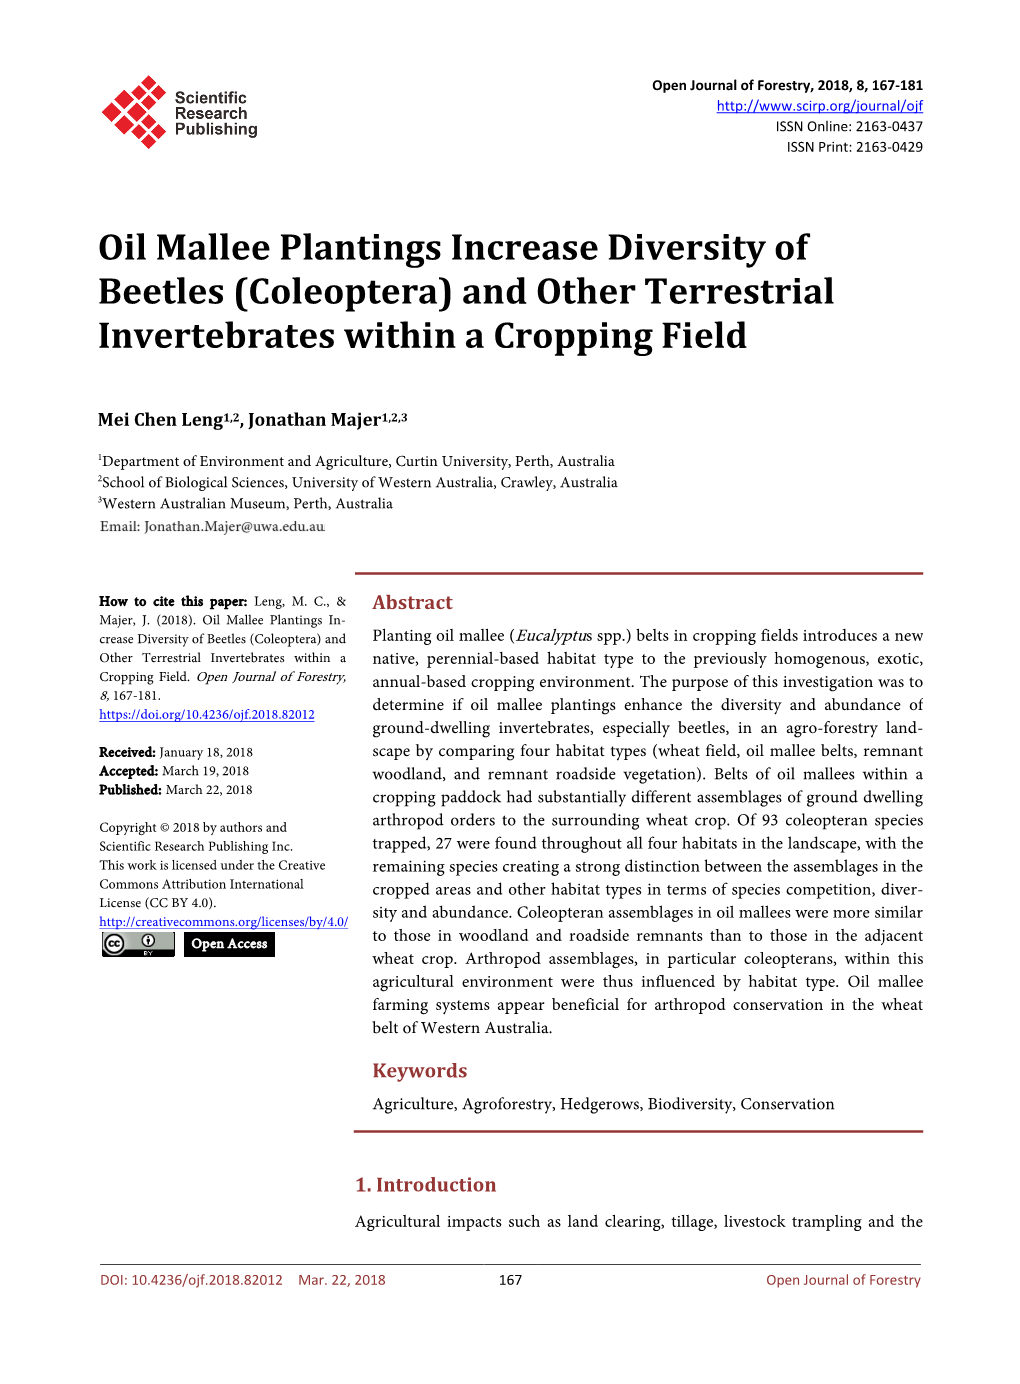 Oil Mallee Plantings Increase Diversity of Beetles (Coleoptera) and Other Terrestrial Invertebrates Within a Cropping Field